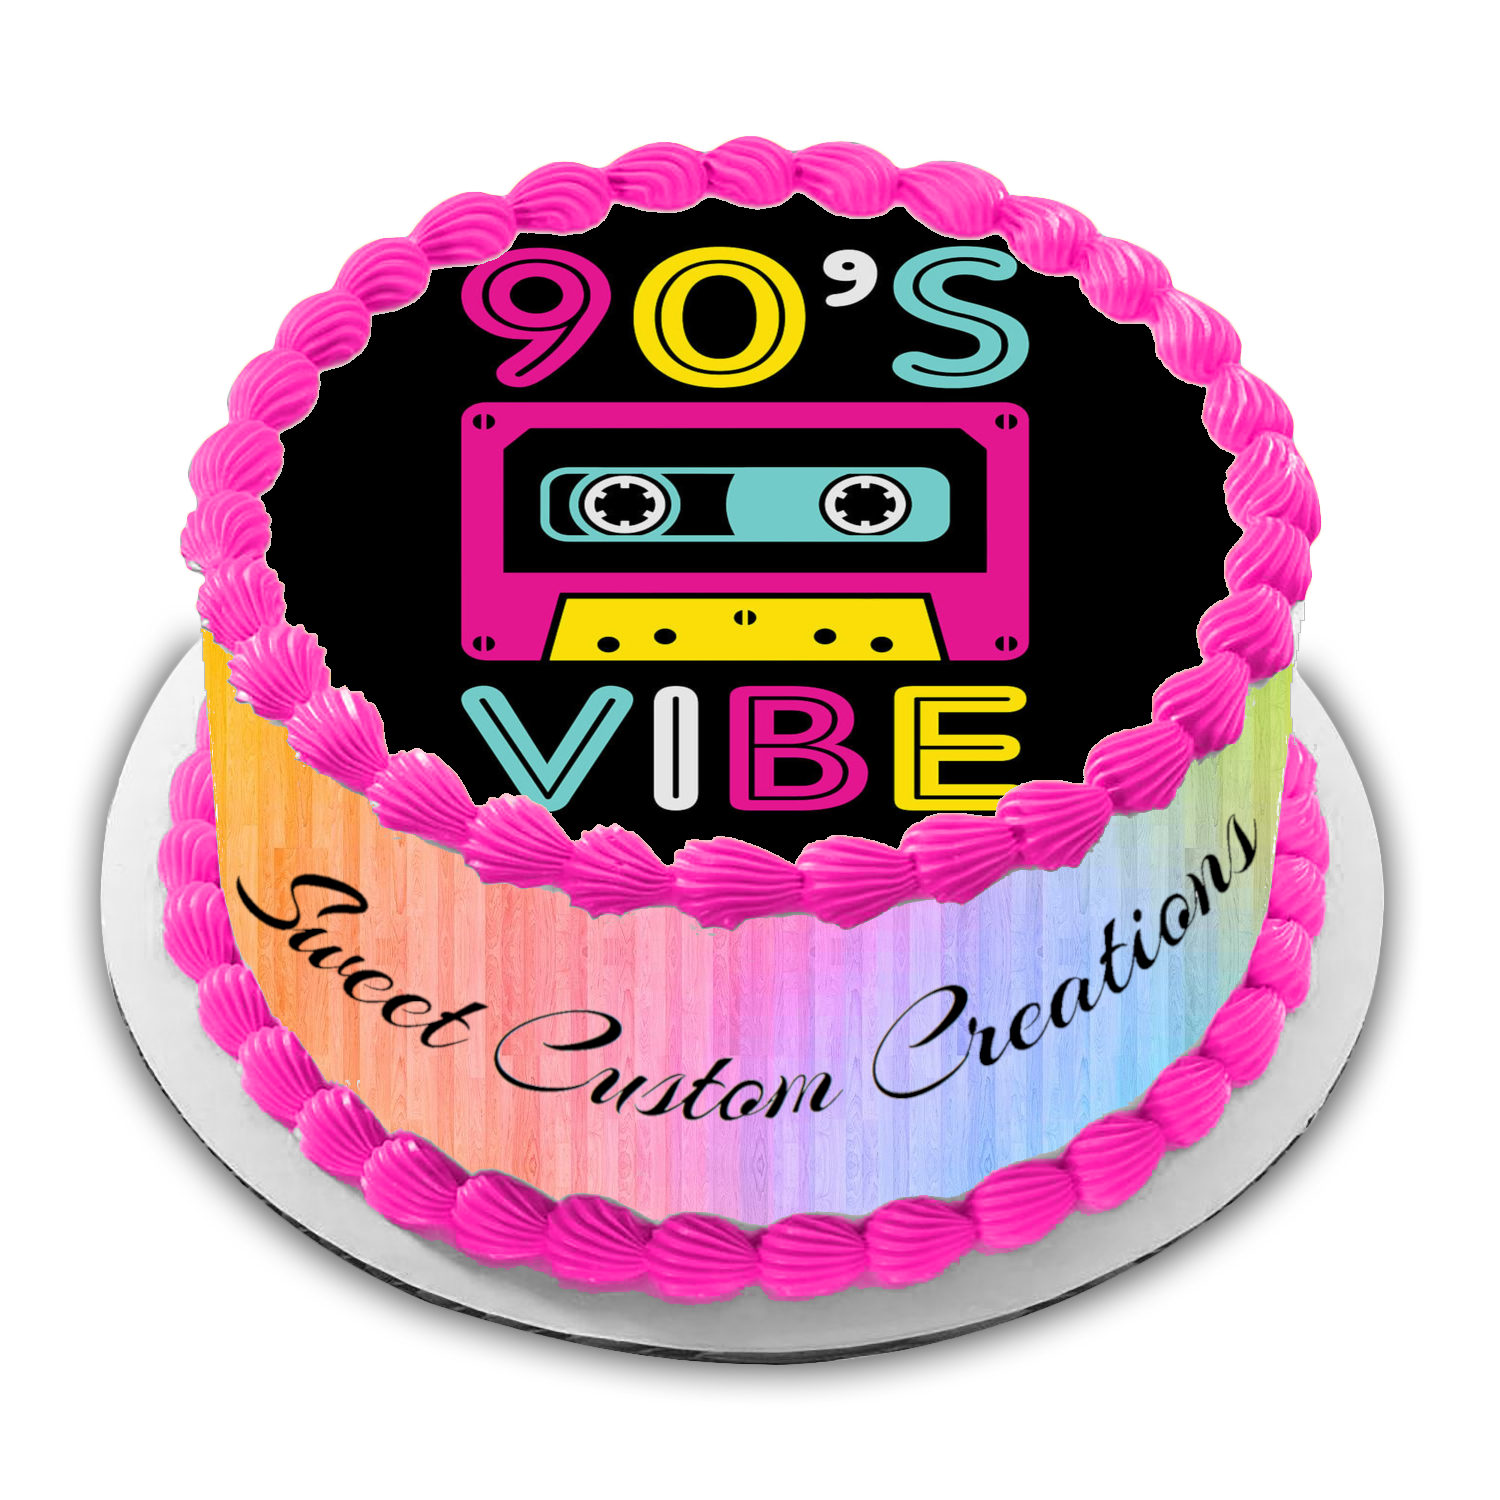 EDIBLE STICKER SHEETS  The 90s – Edible Cake Toppers